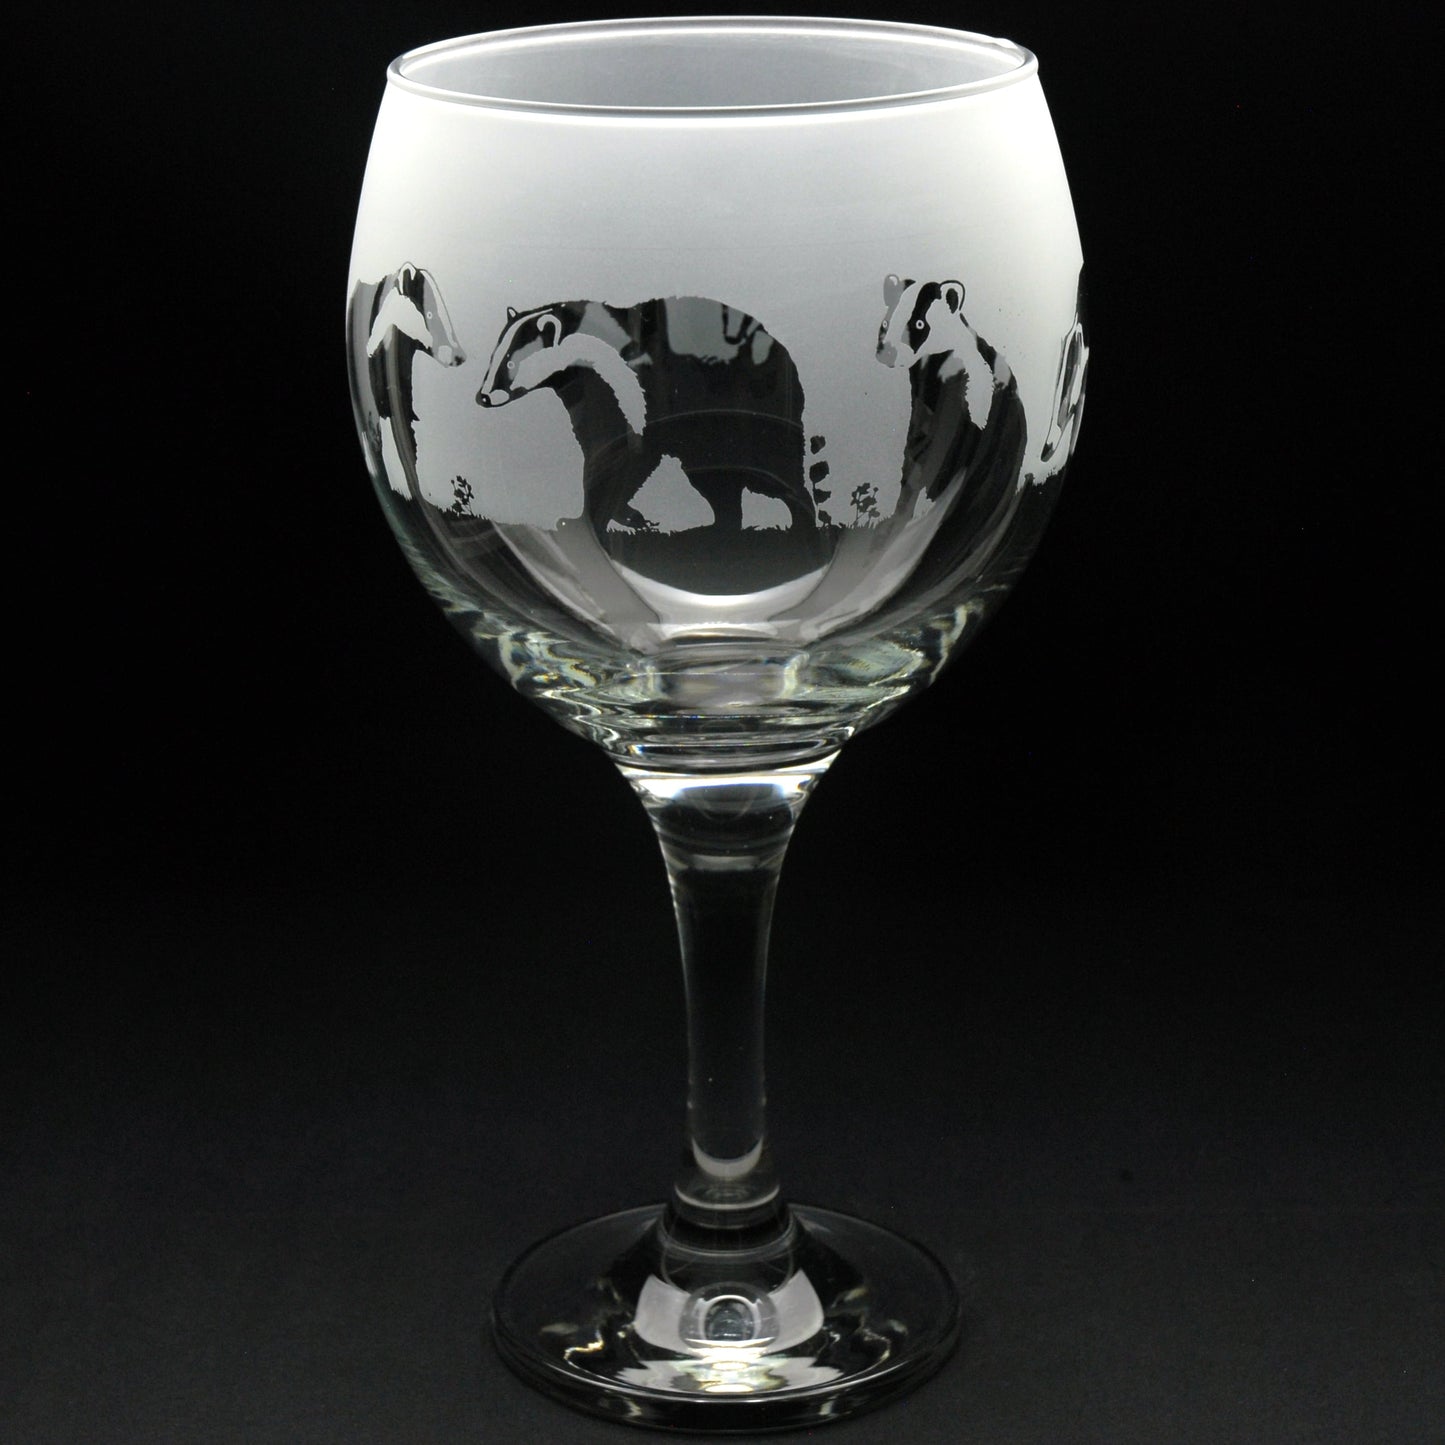 Badger Gin Cocktail Glass - Hand Etched/Engraved Gift